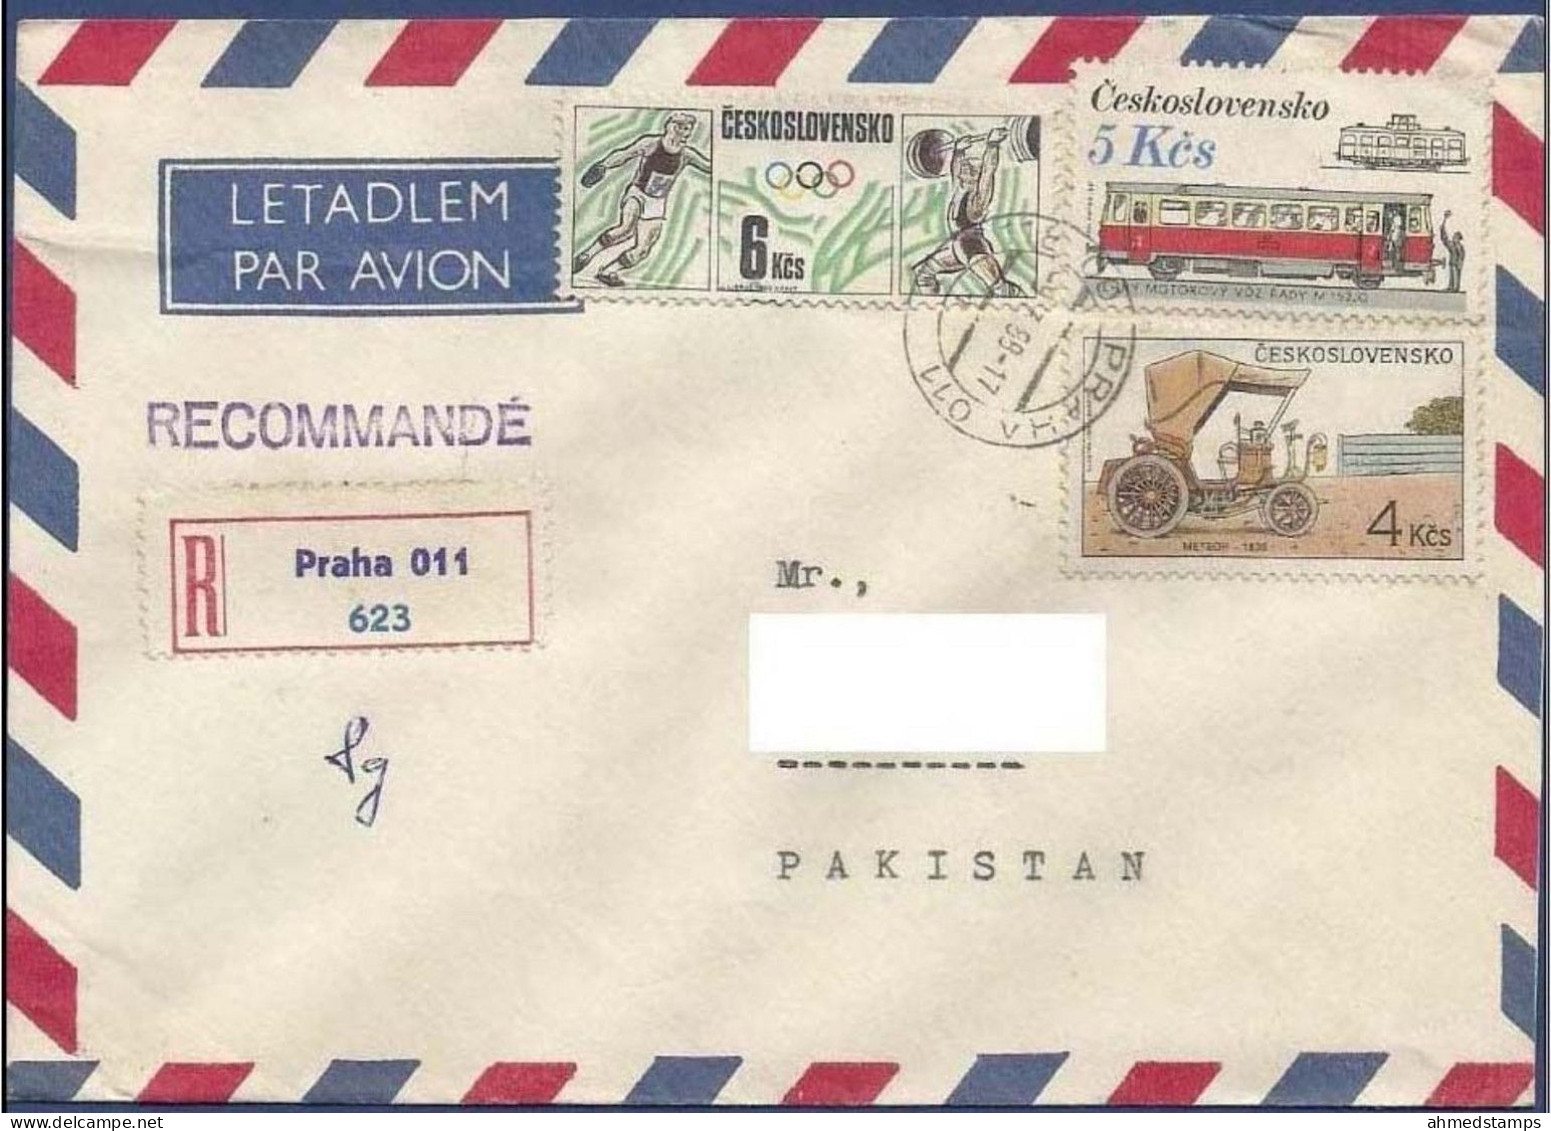 CZECHOSLOVAKIA REGISTERED 1988  POSTAL USED AIRMAIL COVER TO PAKISTAN - Luchtpost